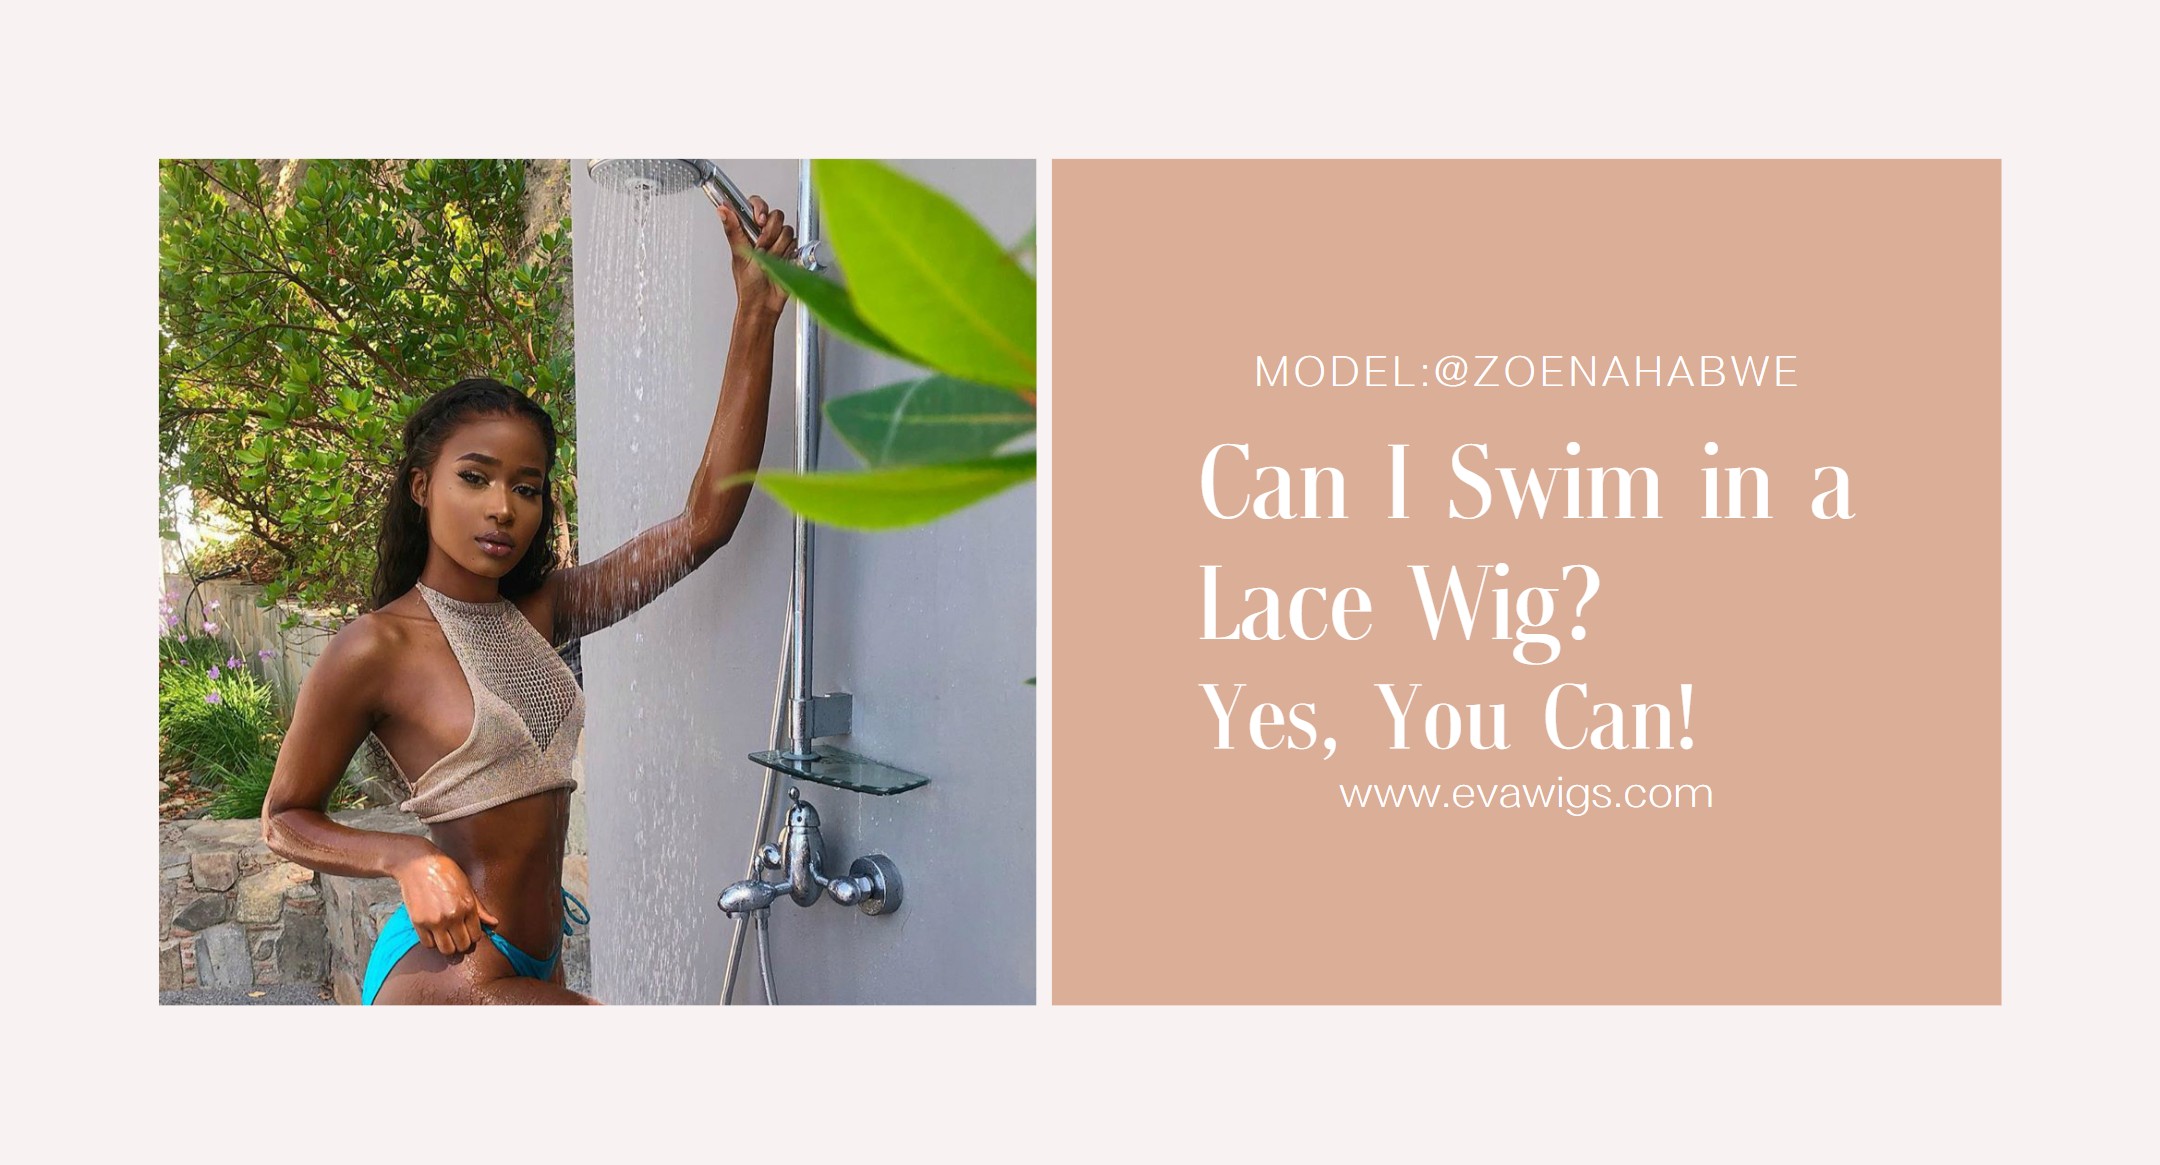 Can I Swim in a Lace Wig? (By Following the Tips of How to Fasten Your Lace Wig in Water. Yes, You C